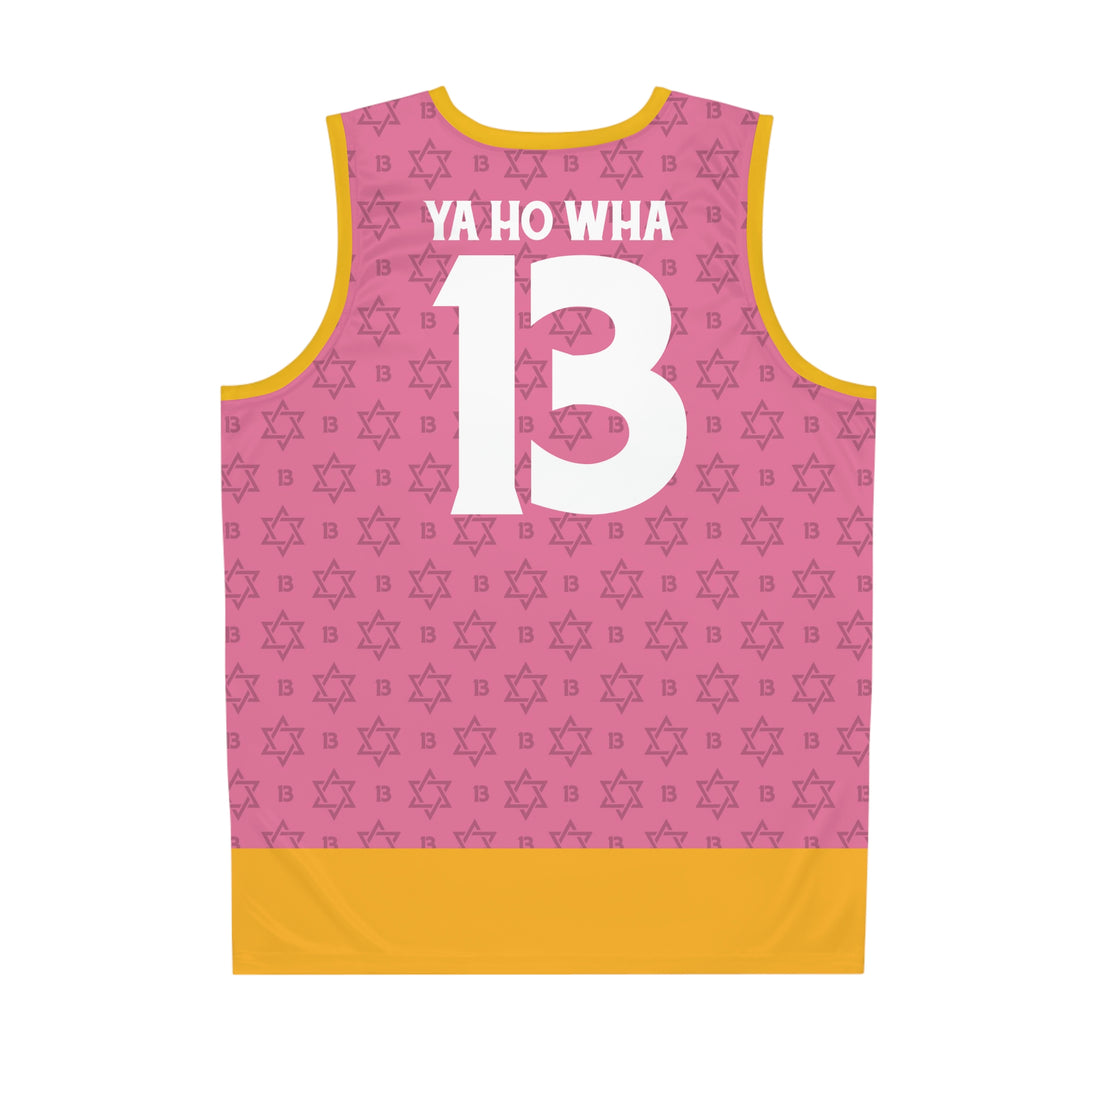 Father Yod's Team Pink Jersey